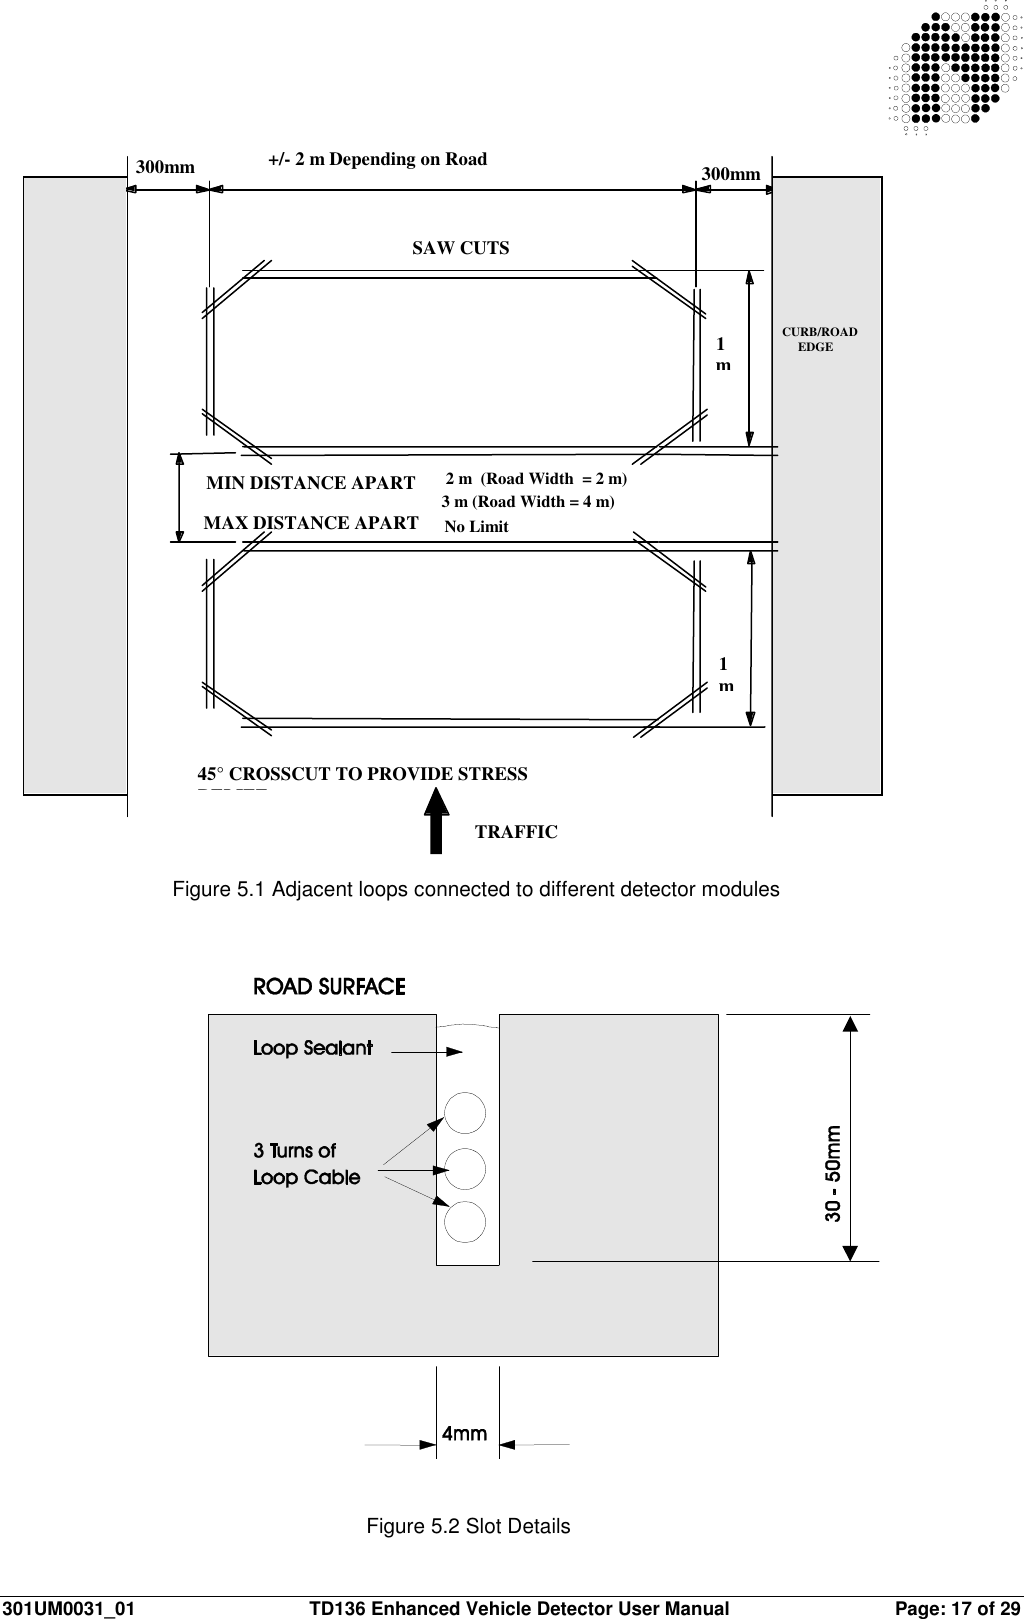  301UM0031_01  TD136 Enhanced Vehicle Detector User Manual  Page: 17 of 29          Figure 5.2 Slot Details Figure 5.1 Adjacent loops connected to different detector modules 45° CROSSCUT TO PROVIDE STRESSRELIEFTRAFFICDIRECTIONMIN DISTANCE APART-MAX DISTANCE APART-2 m  (Road Width  = 2 m)3 m (Road Width = 4 m)No LimitSAW CUTS+/- 2 m Depending on RoadWidthCURB/ROAD     EDGE300mm 300mm1m1m